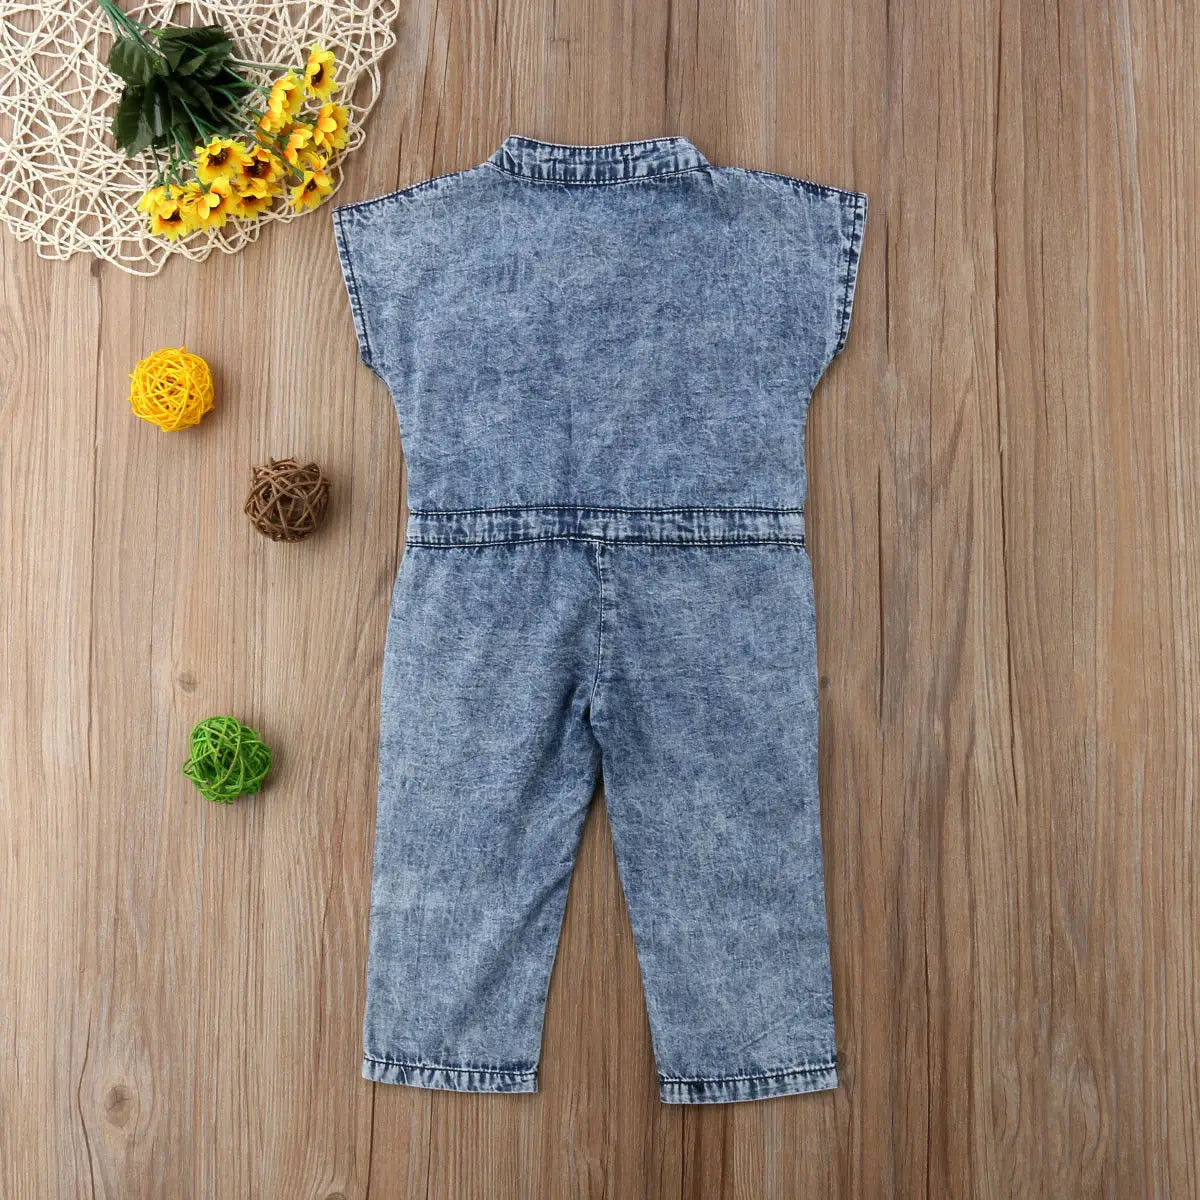 Summer Toddler Kids Baby Girl Clothing Denim Sleeveless Romper Jumpsuit Playsuit Long Pants Outfits 1-6T